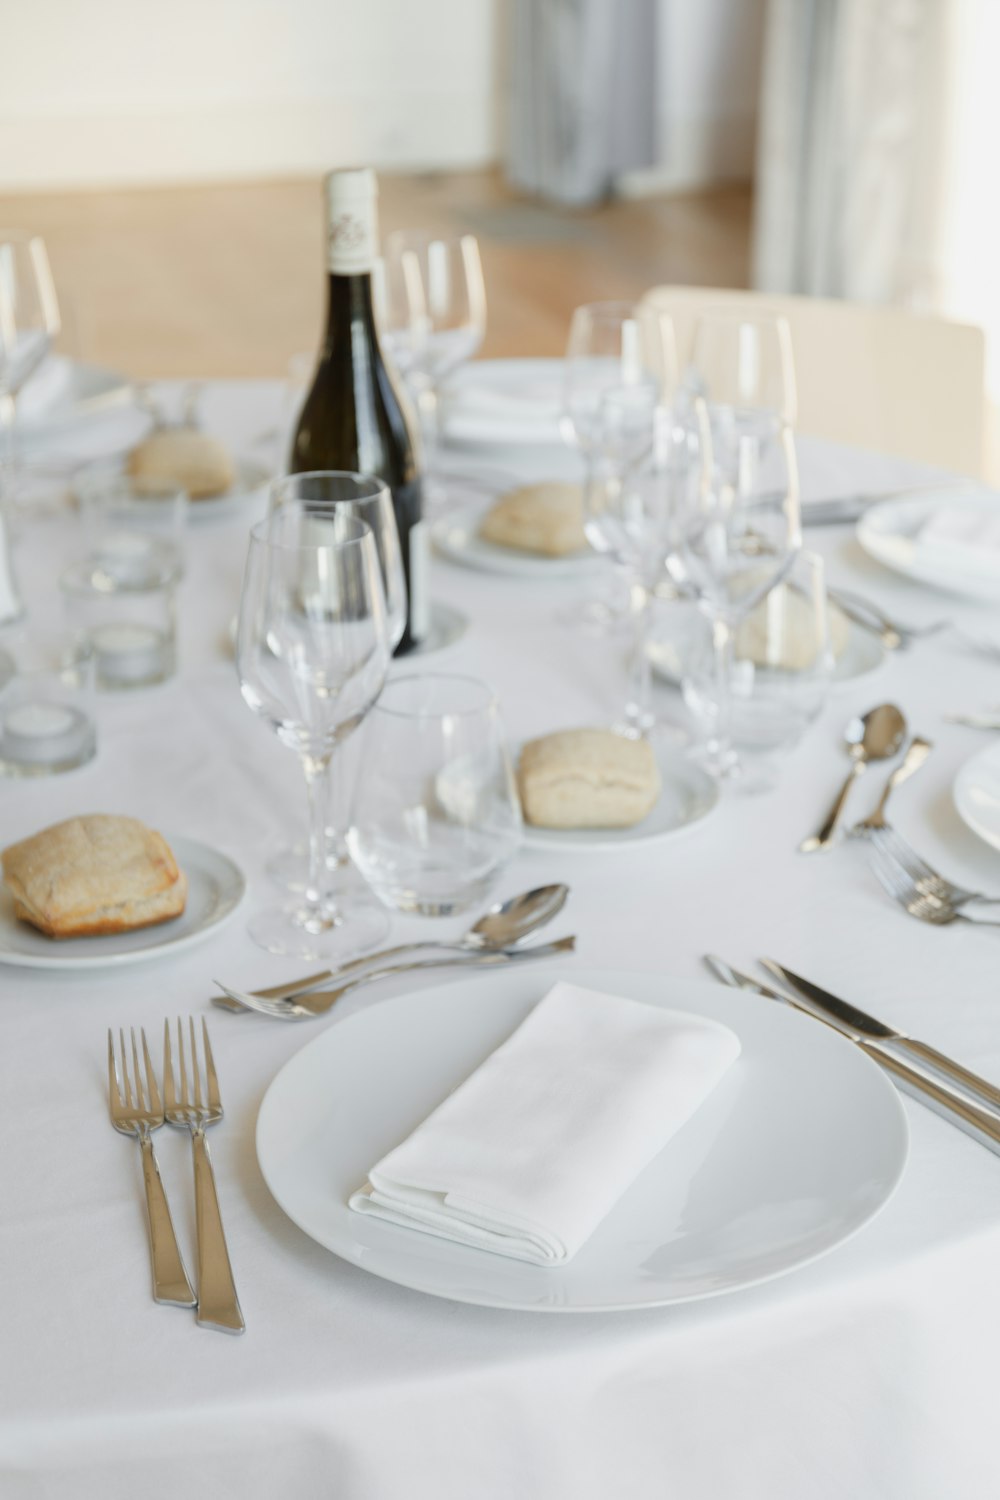 a table set with a bottle of wine and silverware